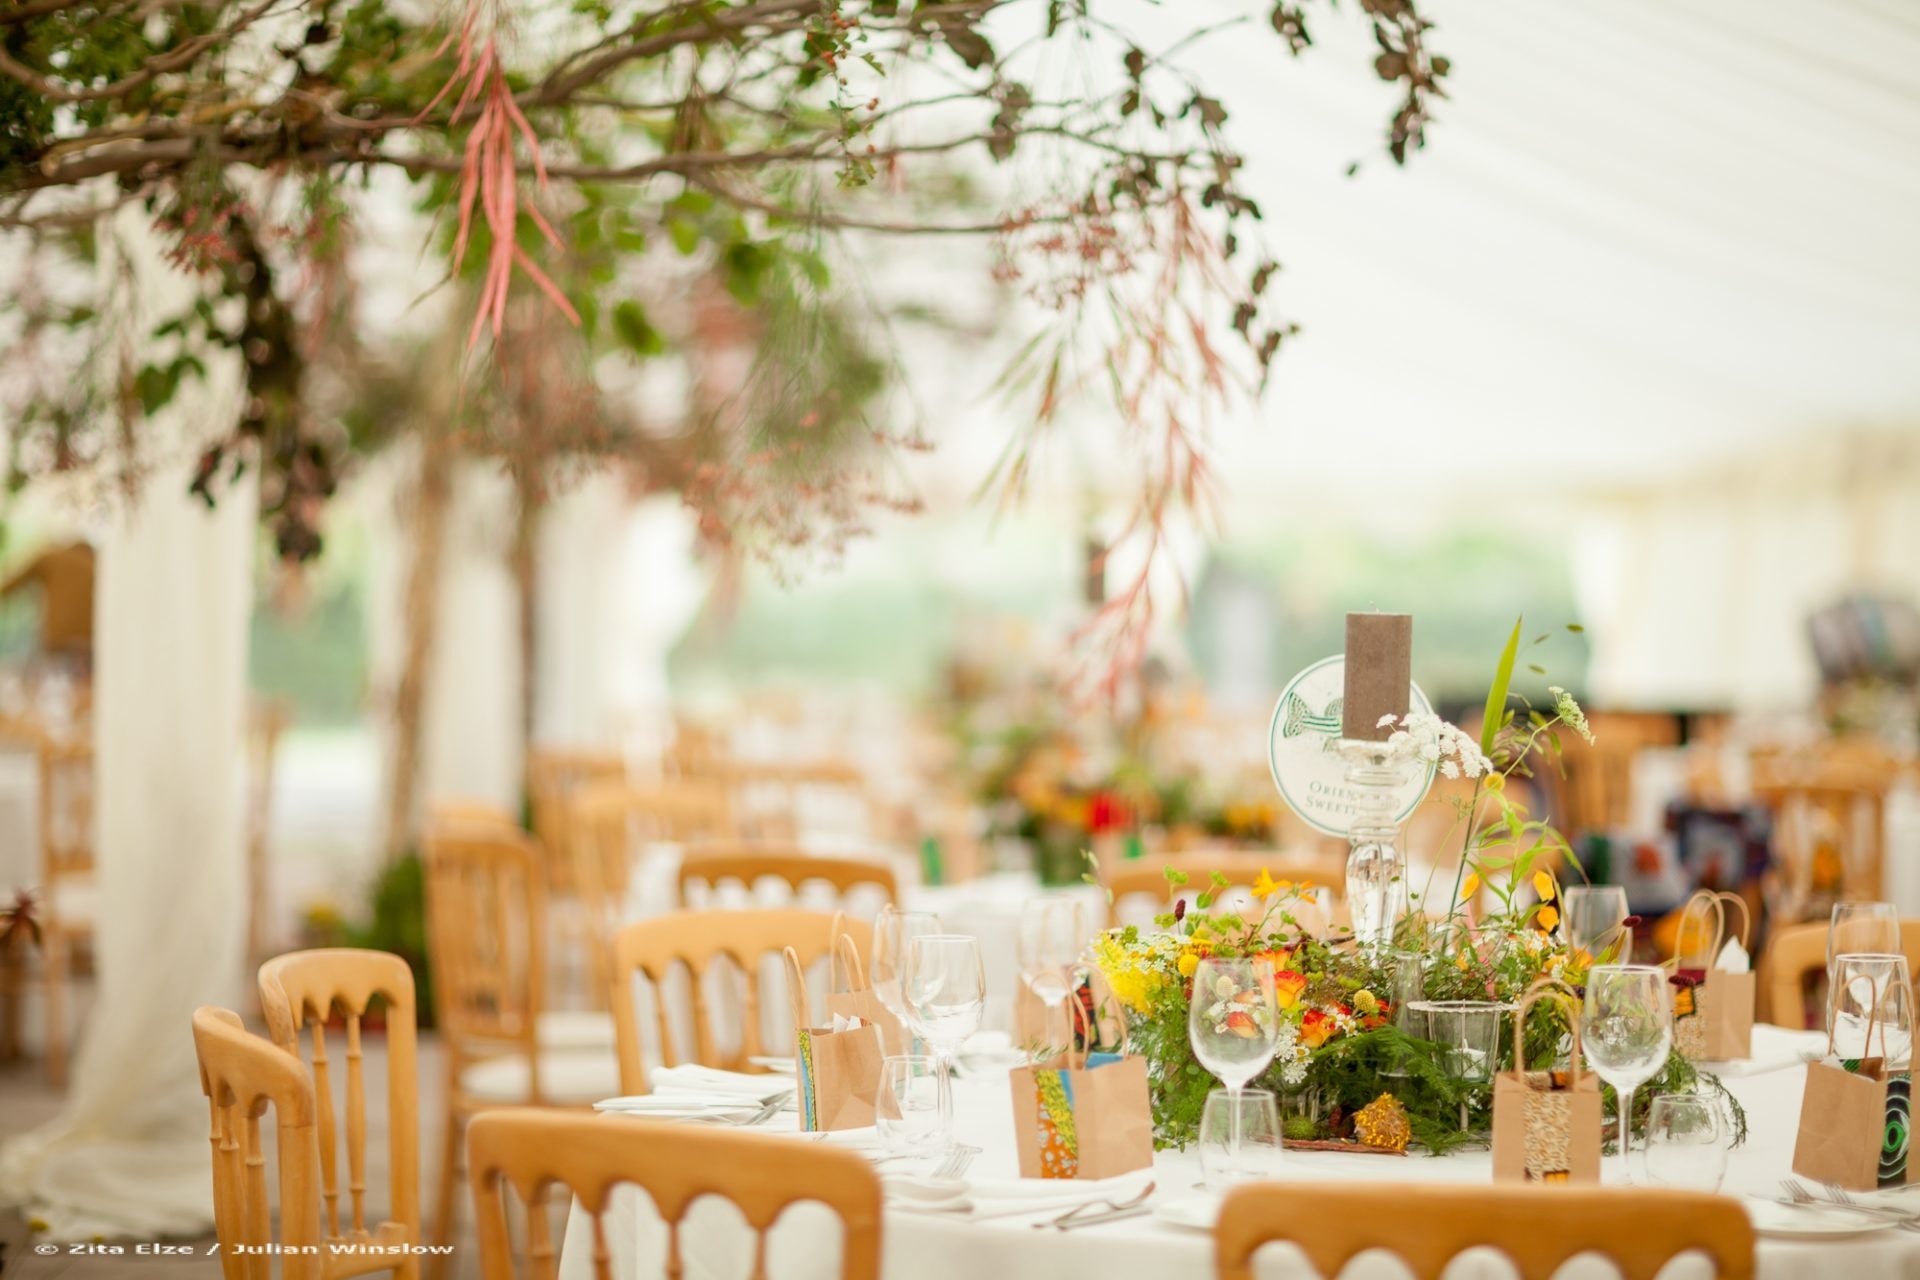 Wedding table with chairs and a flower centrepiece